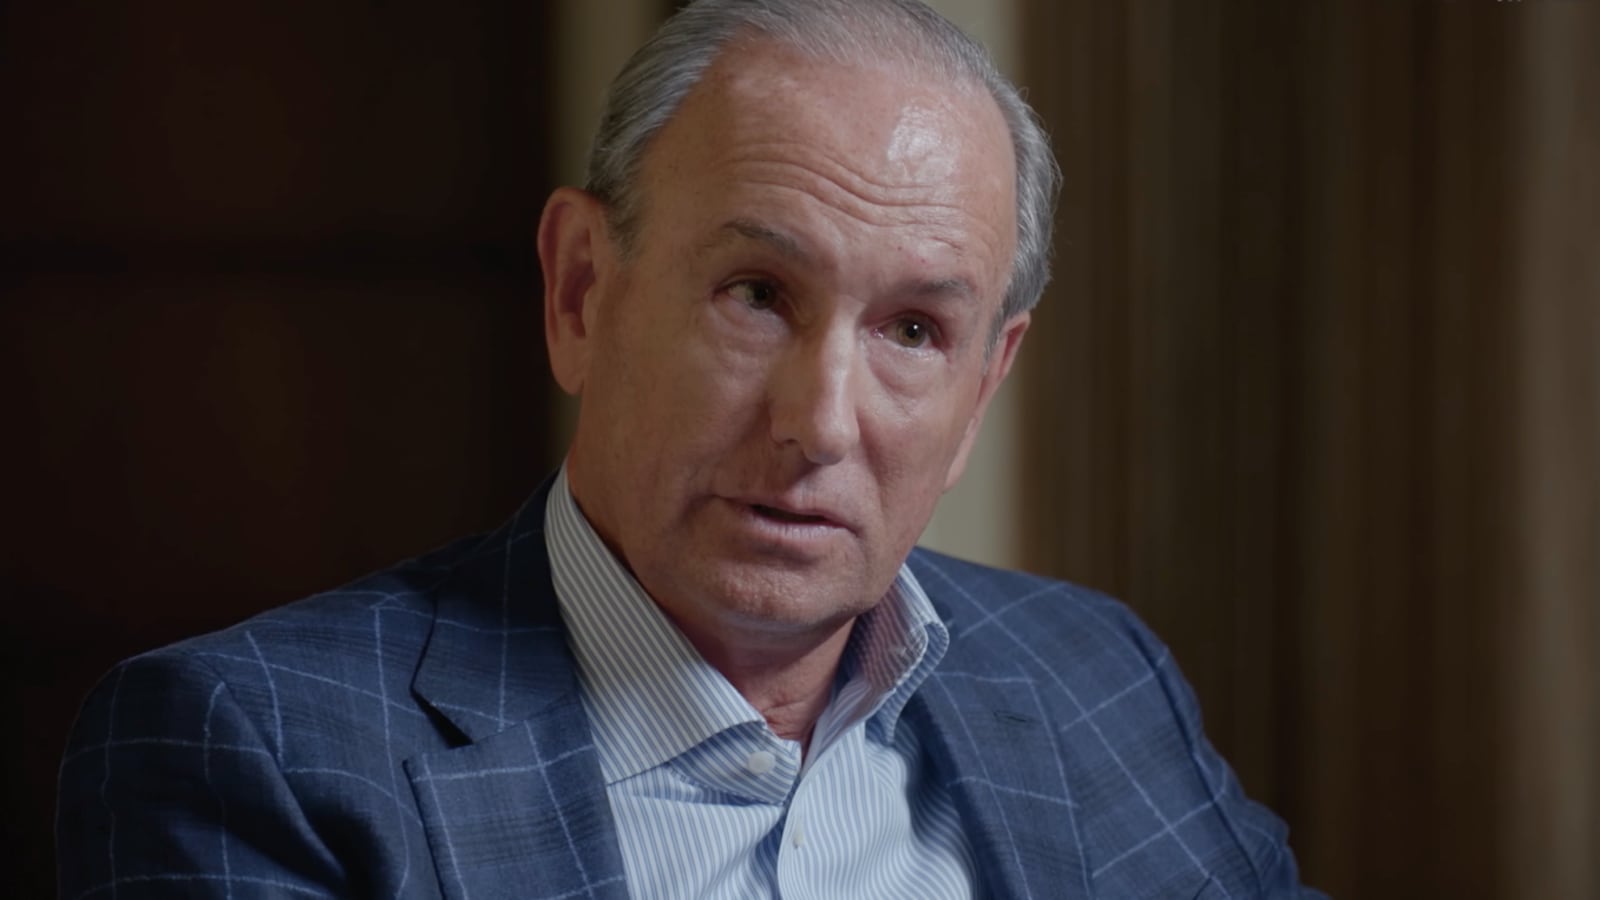 Betsy DeVos' husband Dick DeVos tells HBO's VICE documentary that charter schools have had a positive effect on education in Michigan. "The nature of competition in education is that potentially everybody wins."